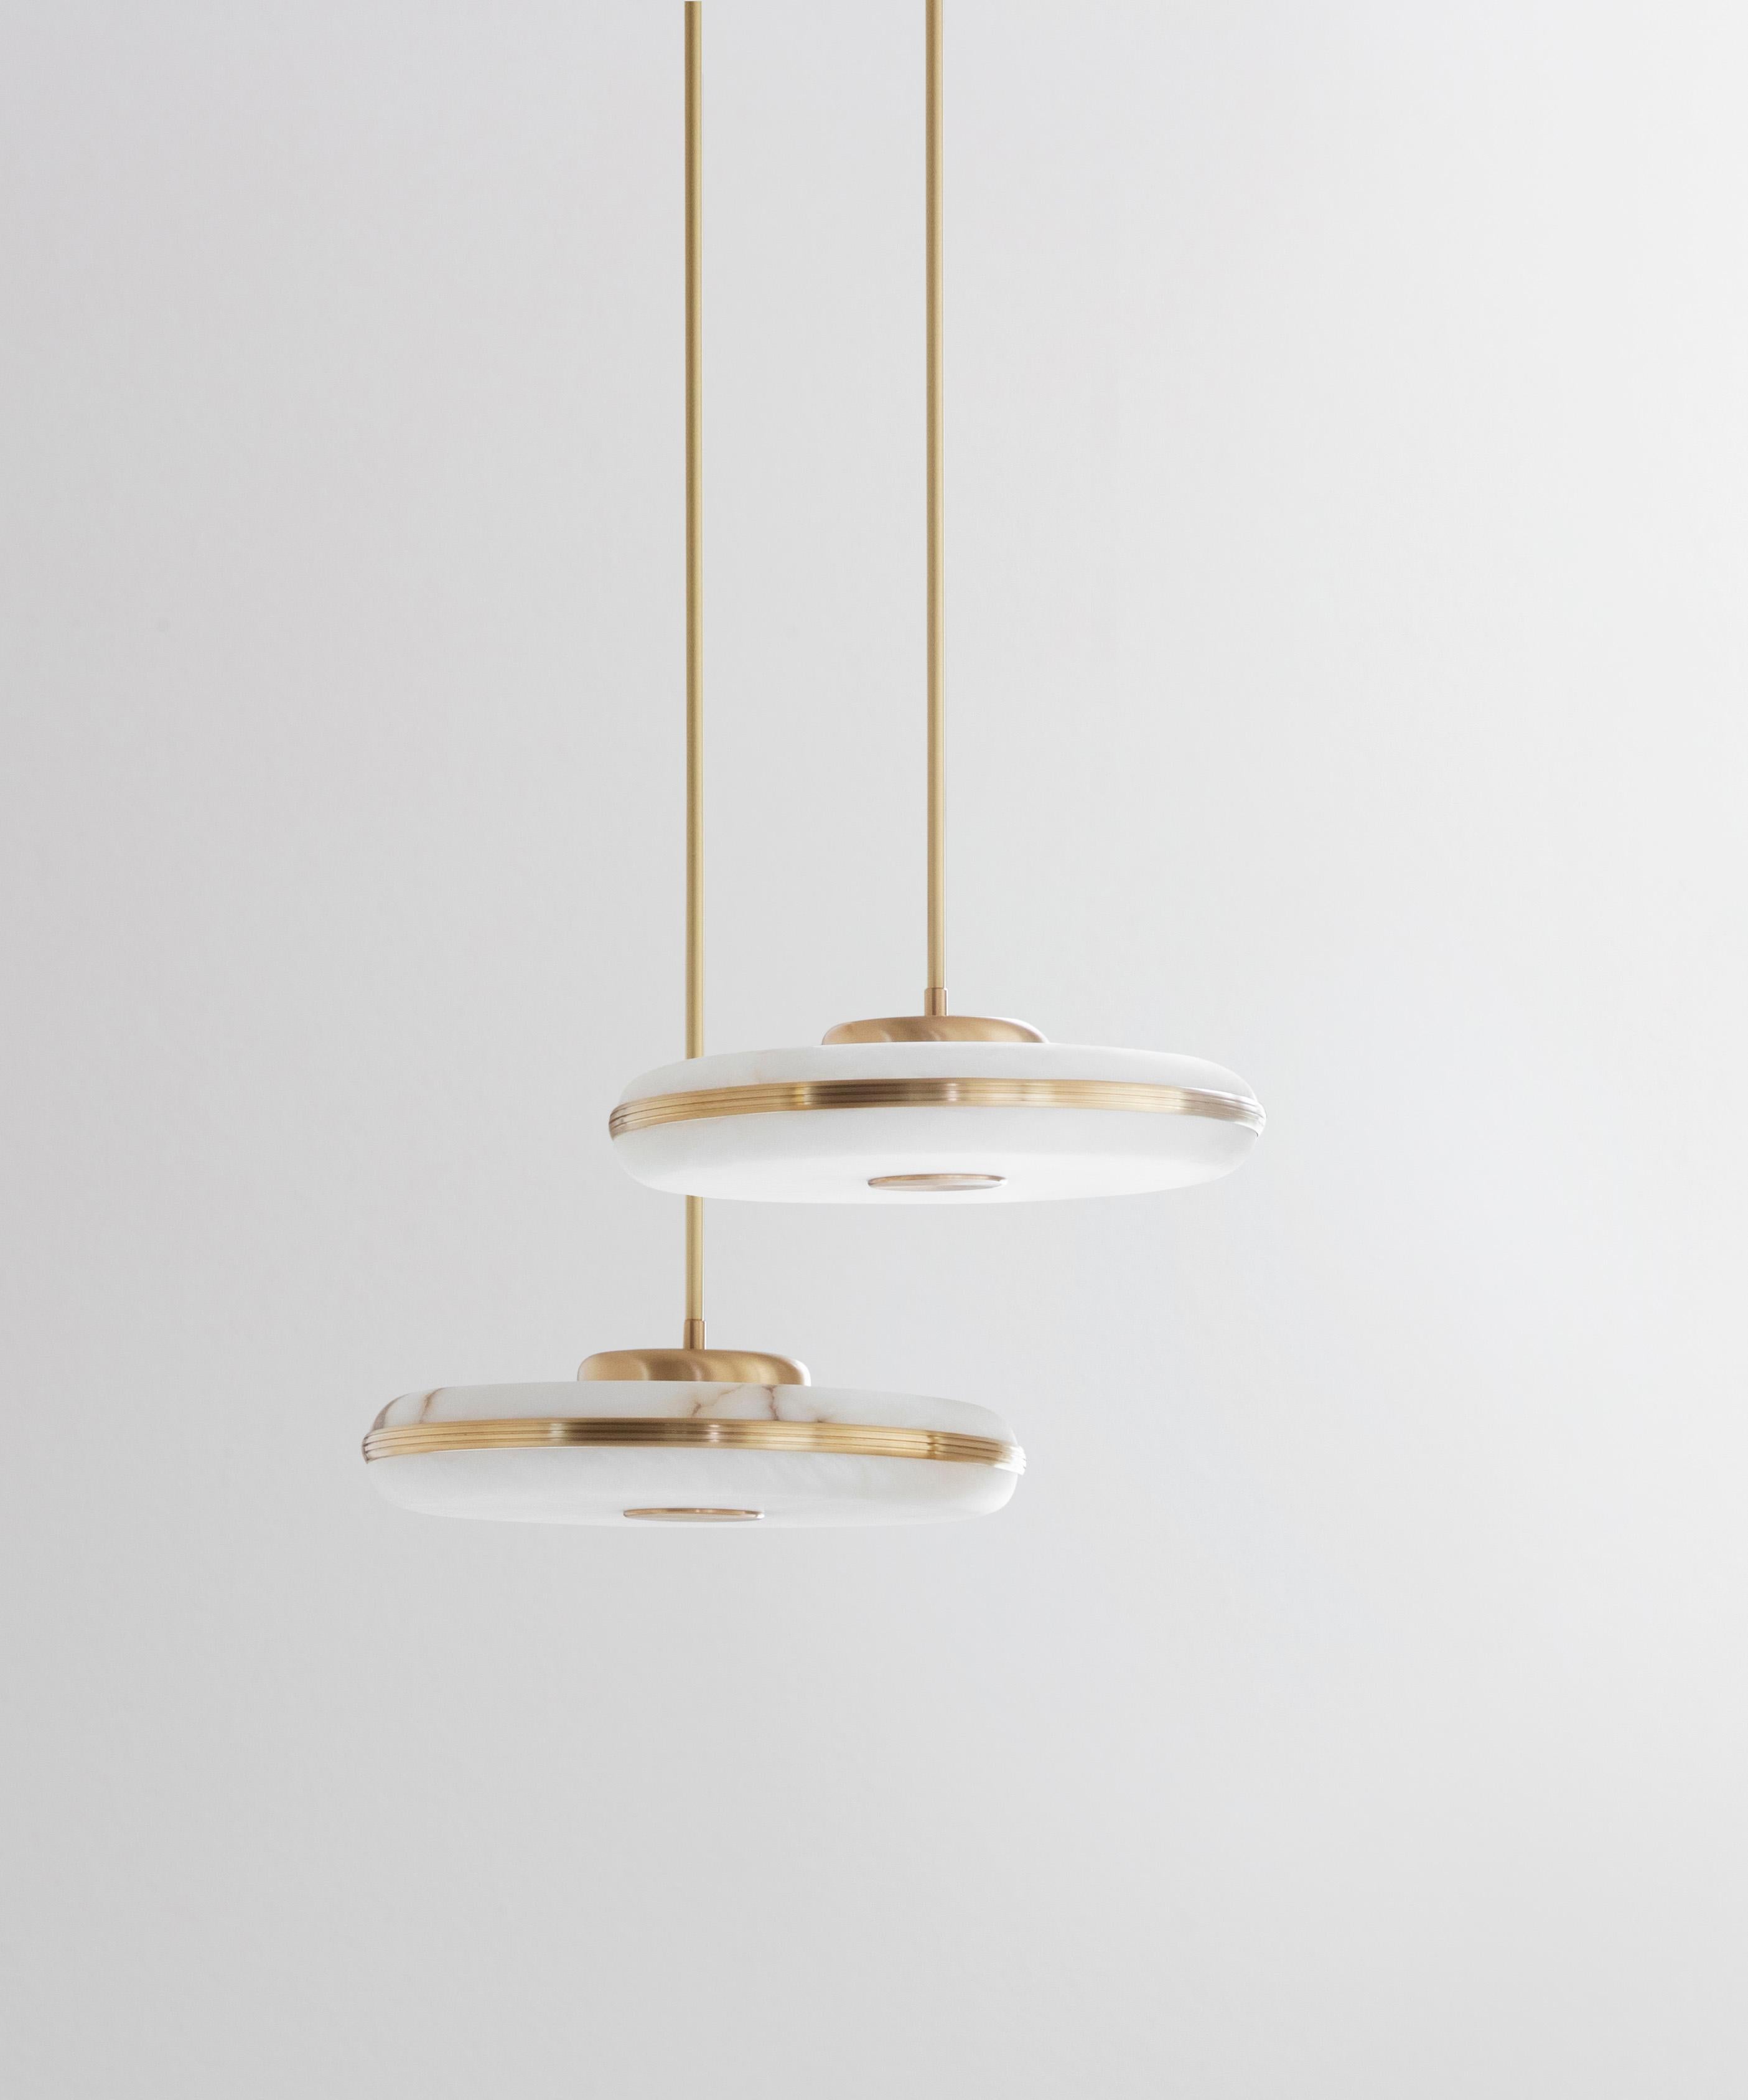 Beran Brushed Brass Large Pendant Lamp by Bert Frank
Dimensions: Ø 36 x H 6 cm. 
Materials: Brass and alabaster.

Available in two different sizes. Available in different finishes and materials. Height is customized to order. Please contact us.